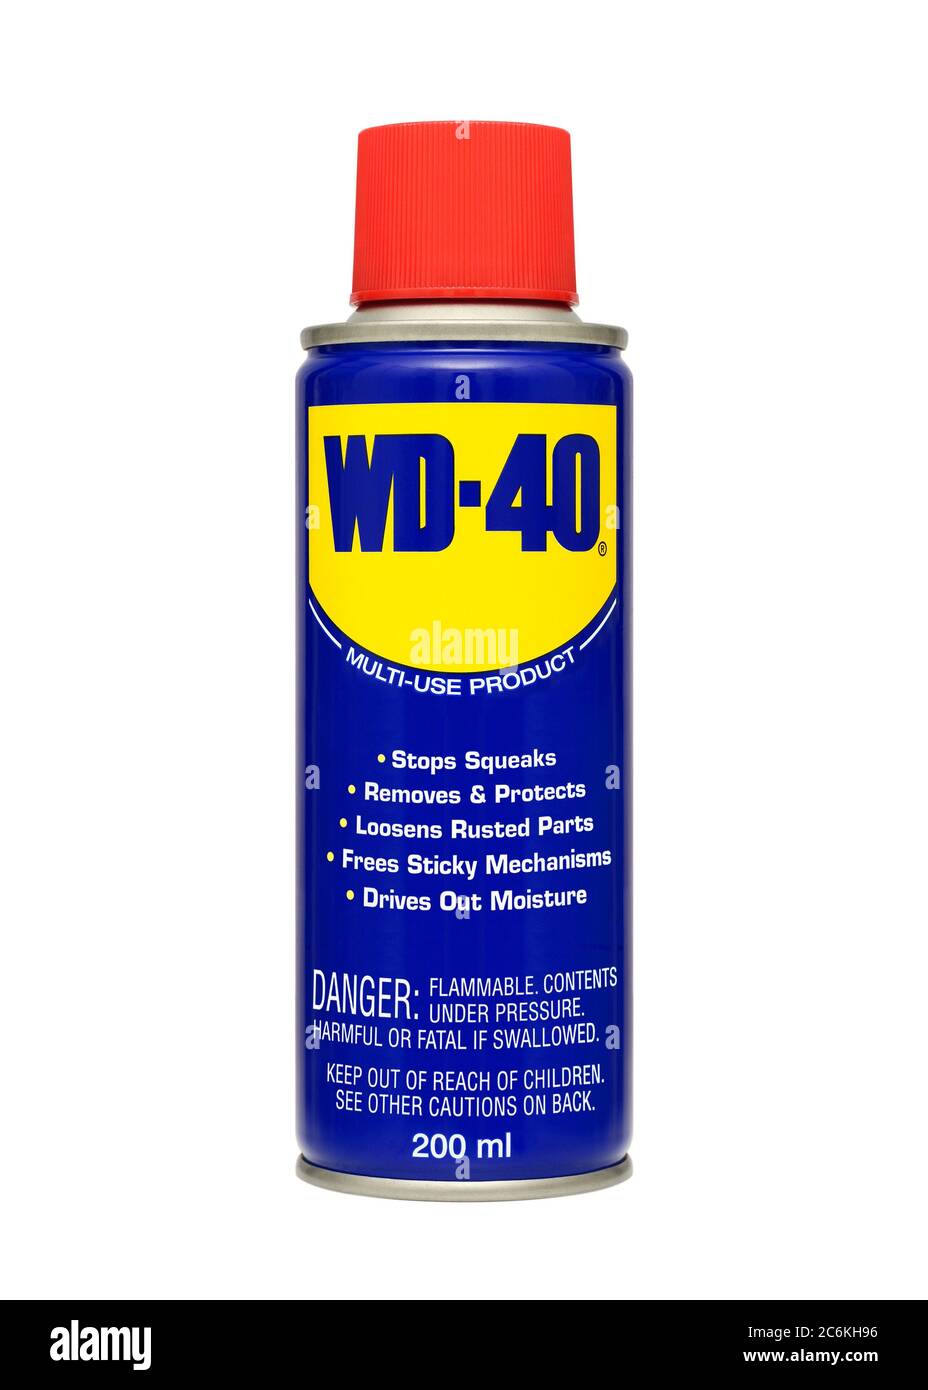 WD-40 Lubricant in a Spray Can against a White Background Stock Photo